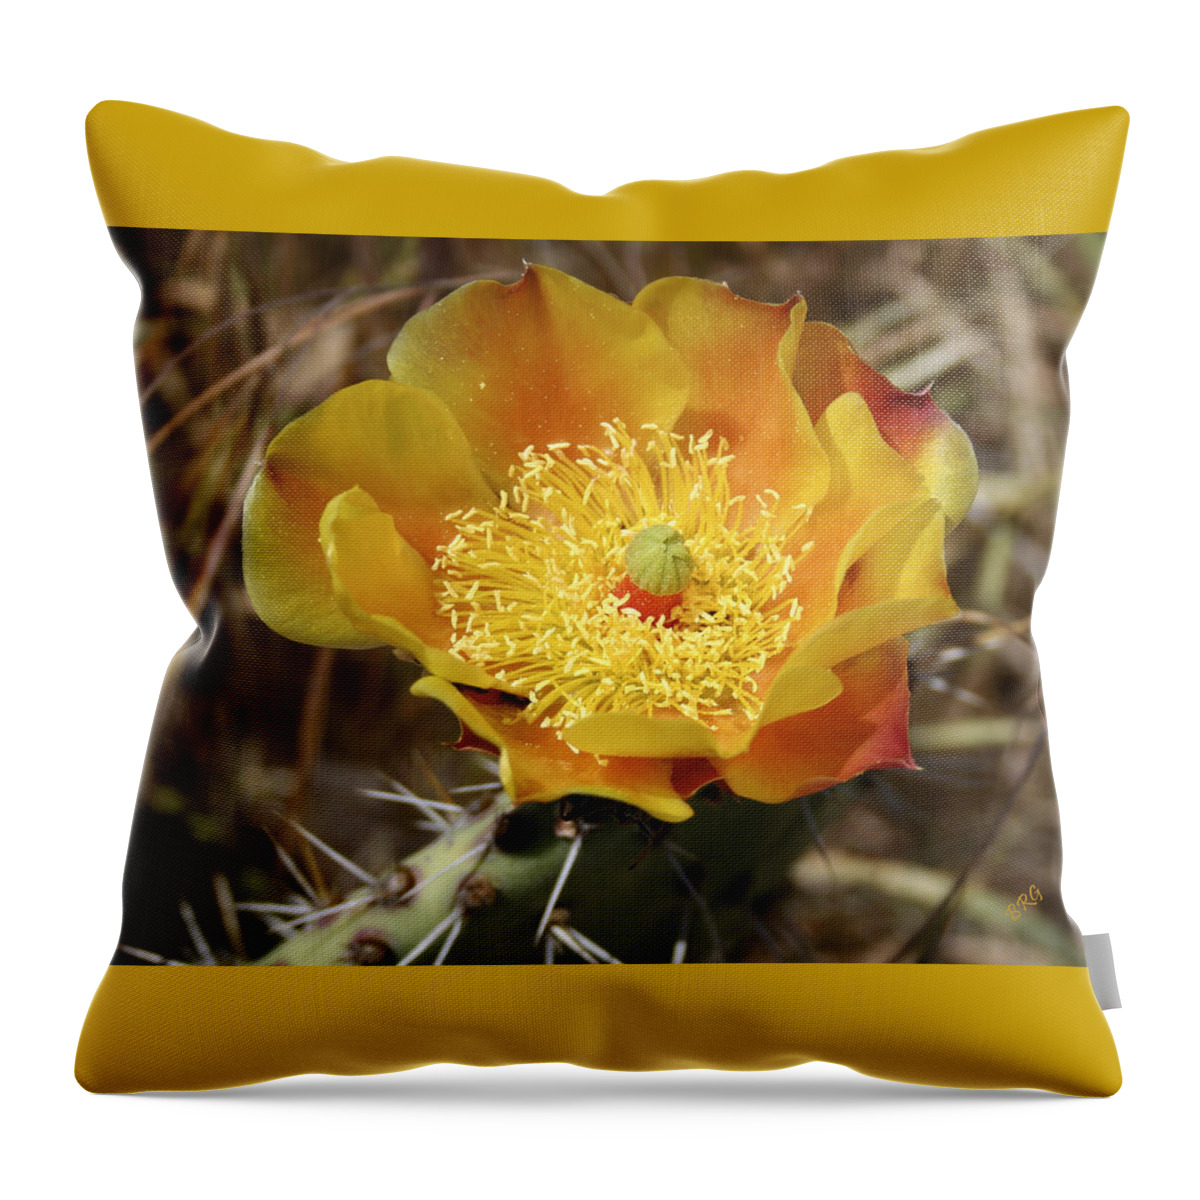 Cactus Flower Throw Pillow featuring the photograph Yellow Cactus Flower On Display by Ben and Raisa Gertsberg